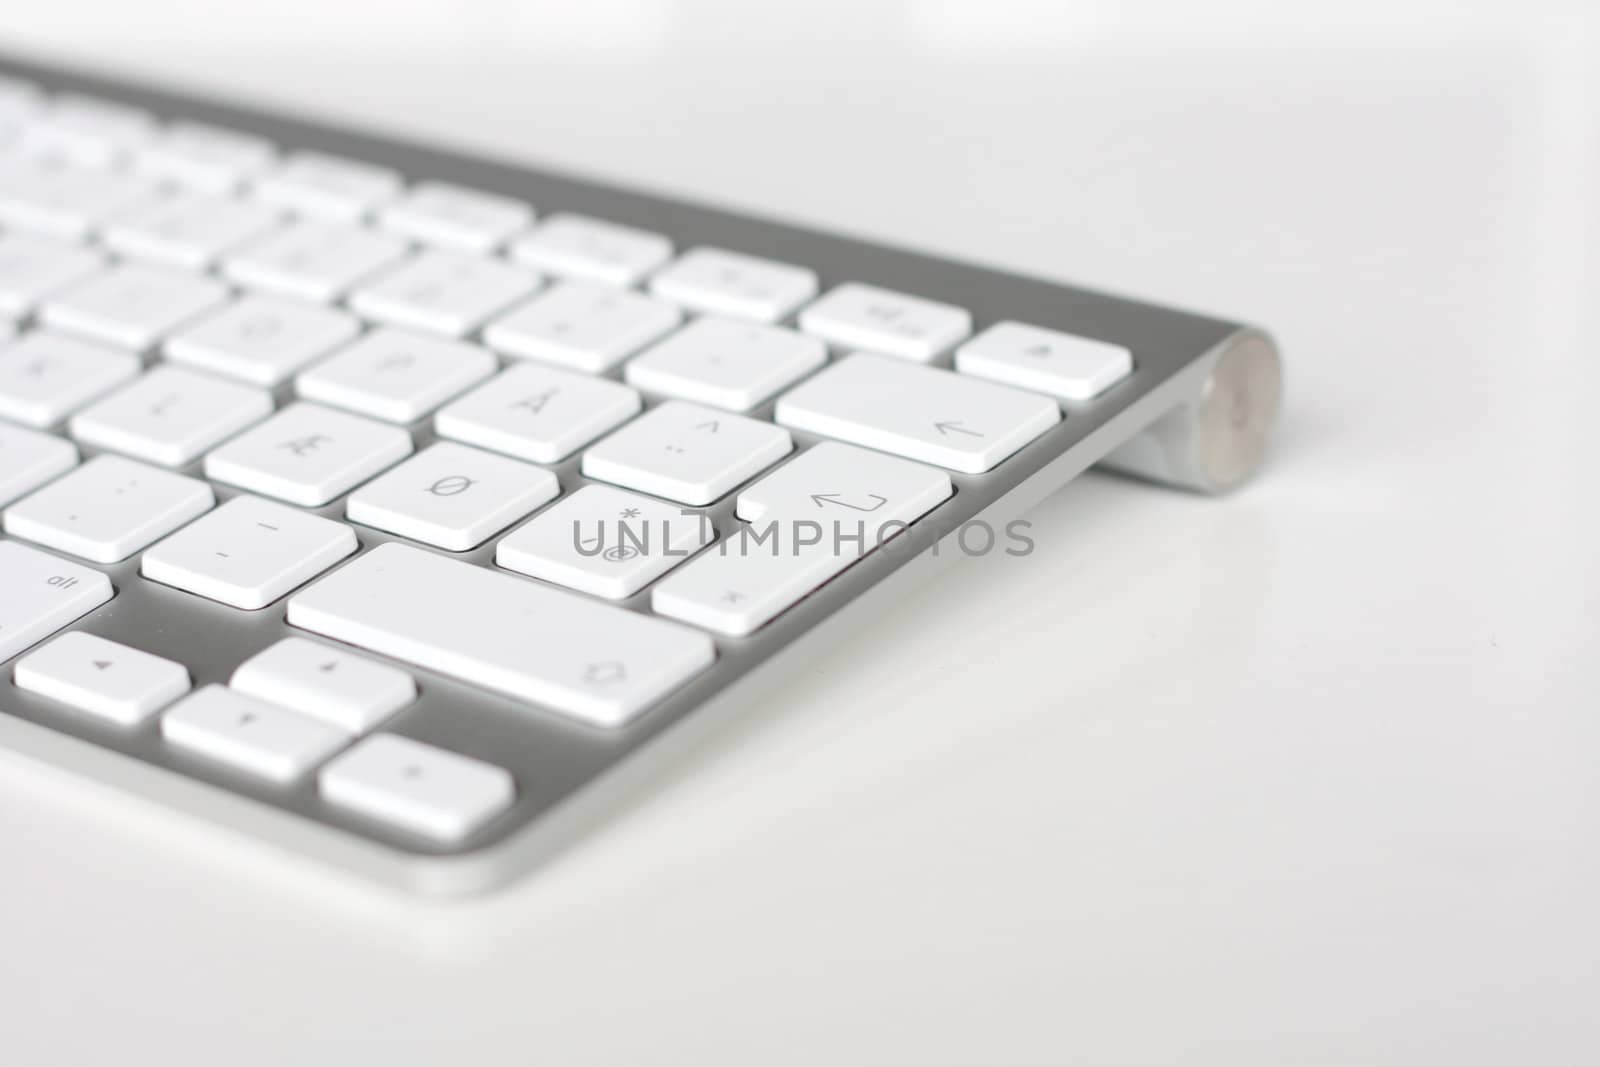 A keyboard with focus on the Enter key